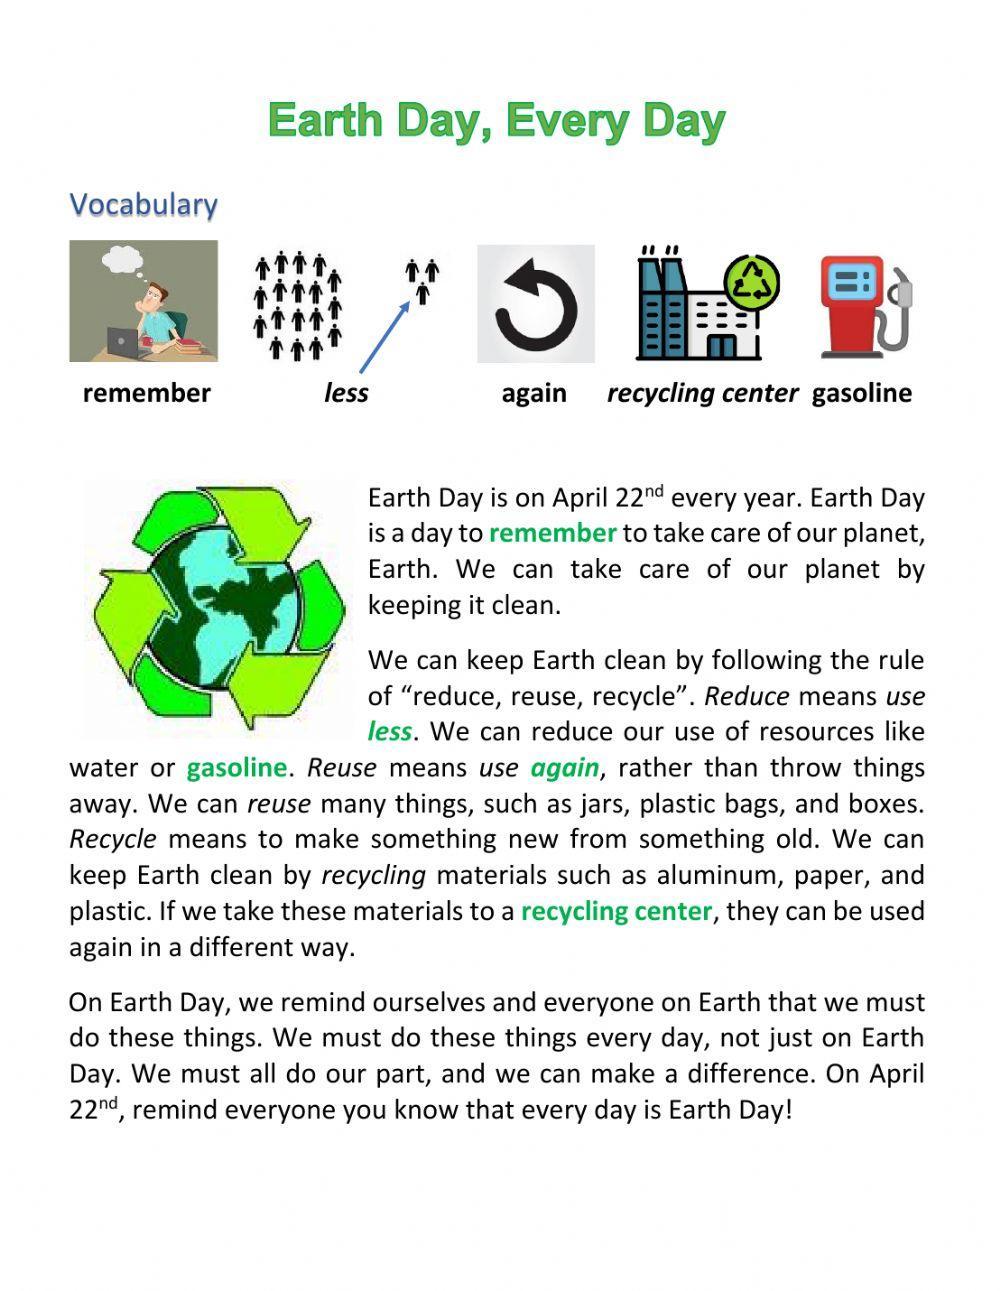 Earth Day, Every Day